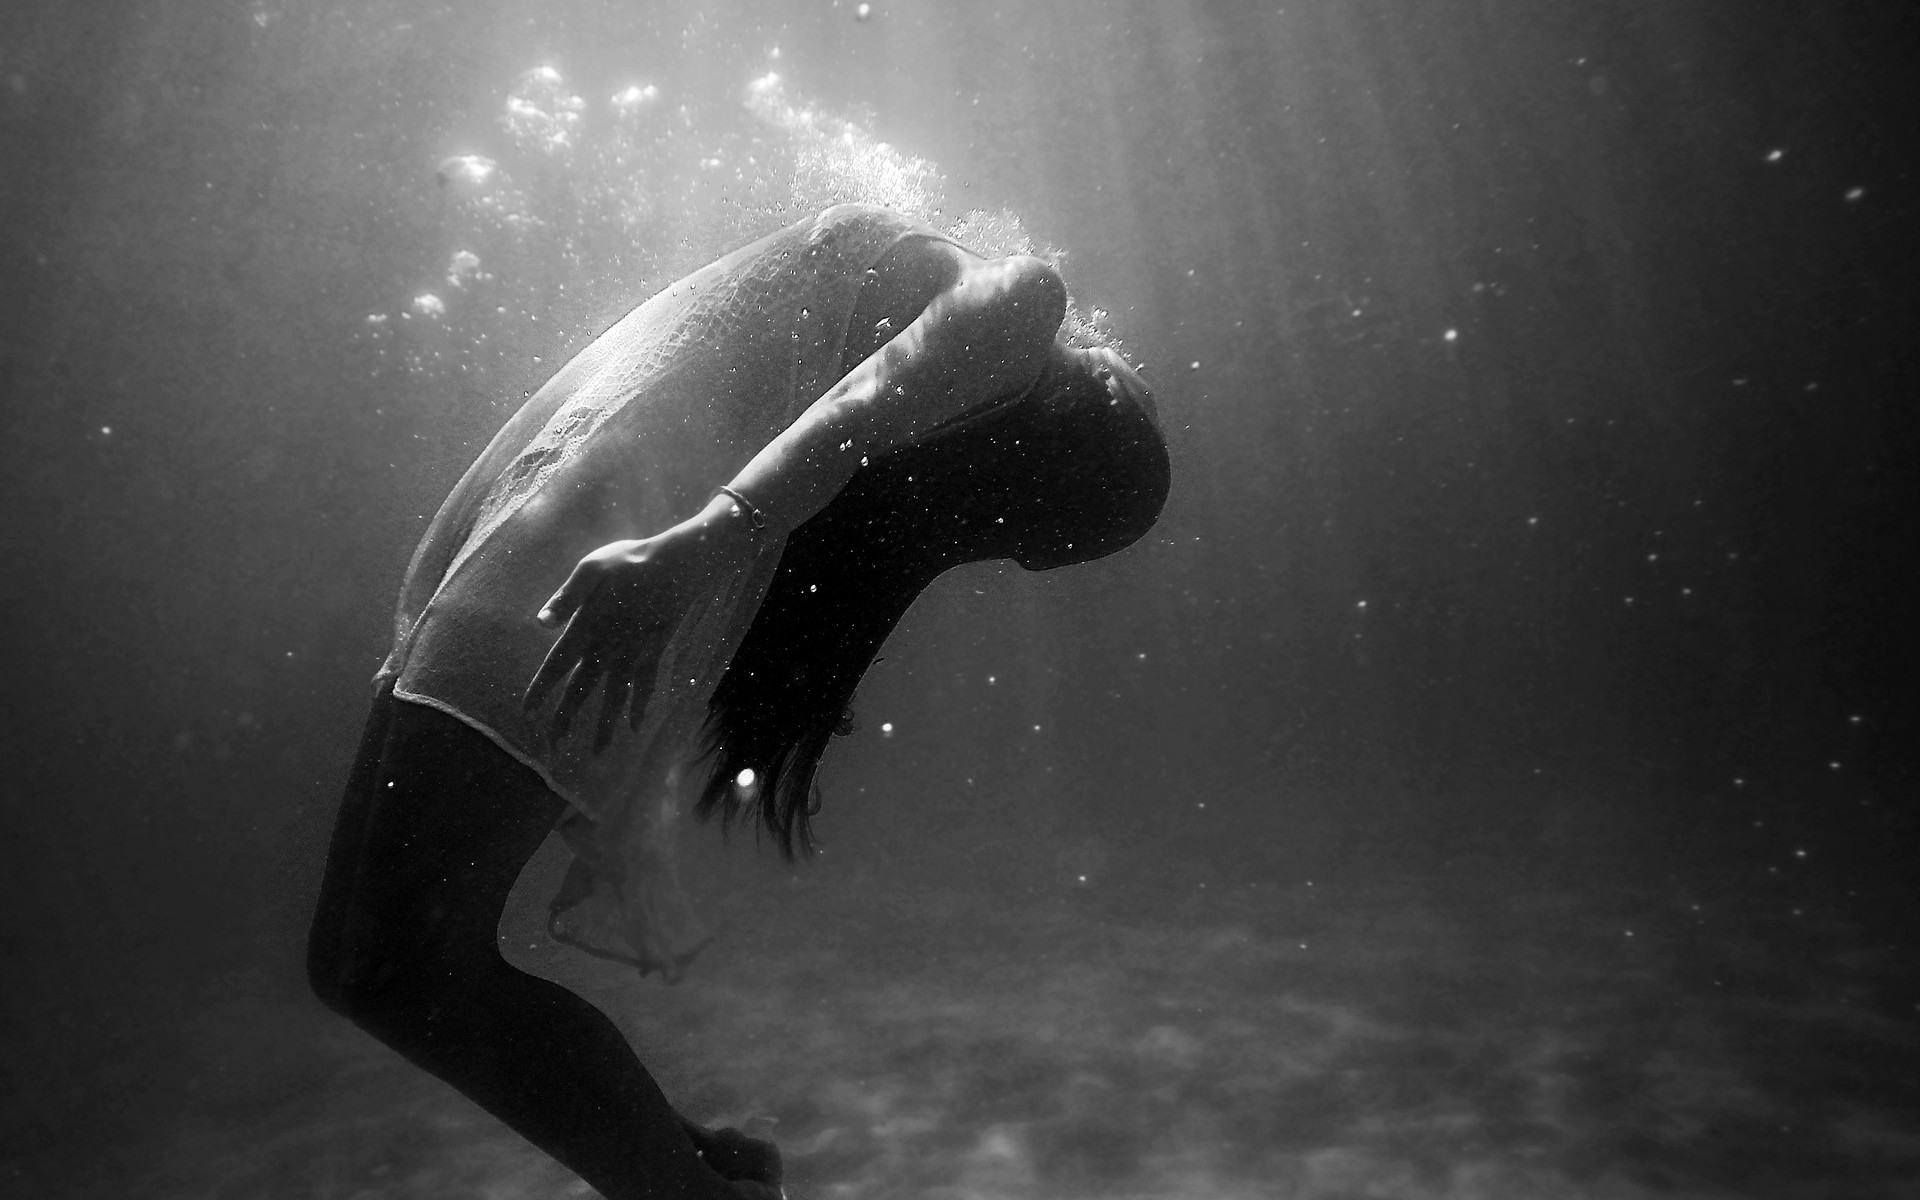 Image: Black and white photograph of a woman submerged beneath water.